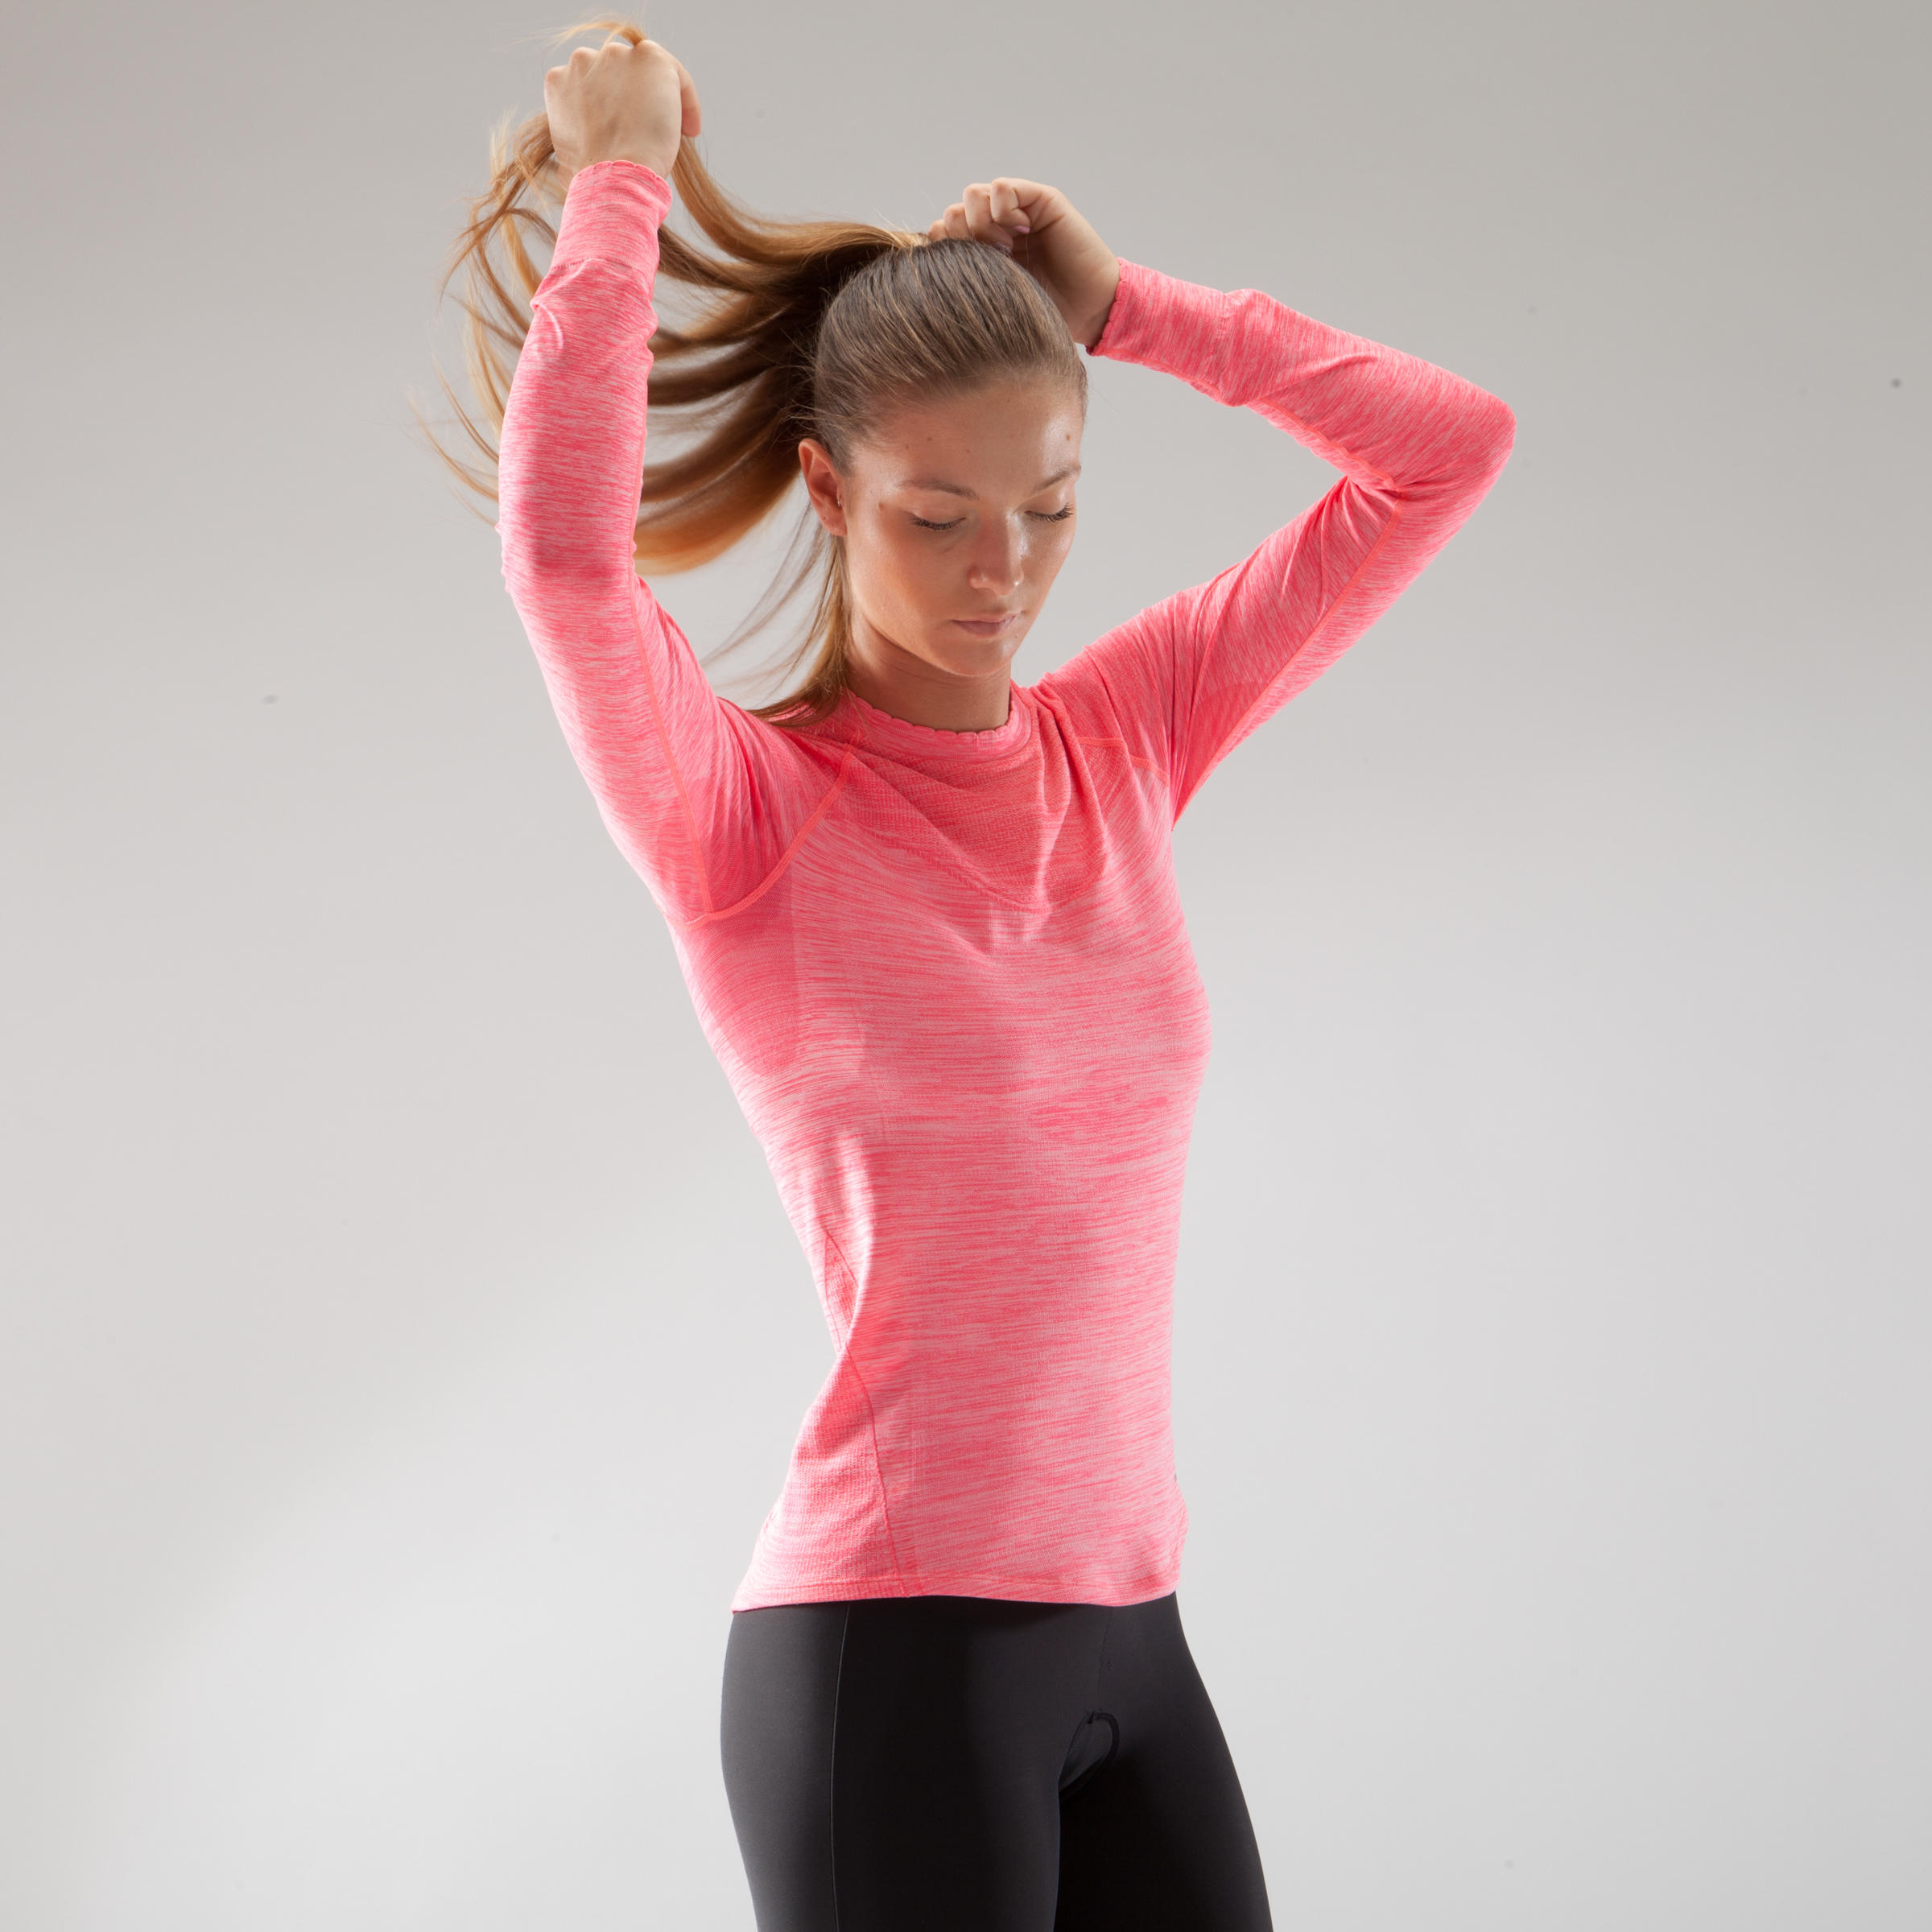 500 Women's Long-Sleeved Cycling Base Layer - Pink 6/12